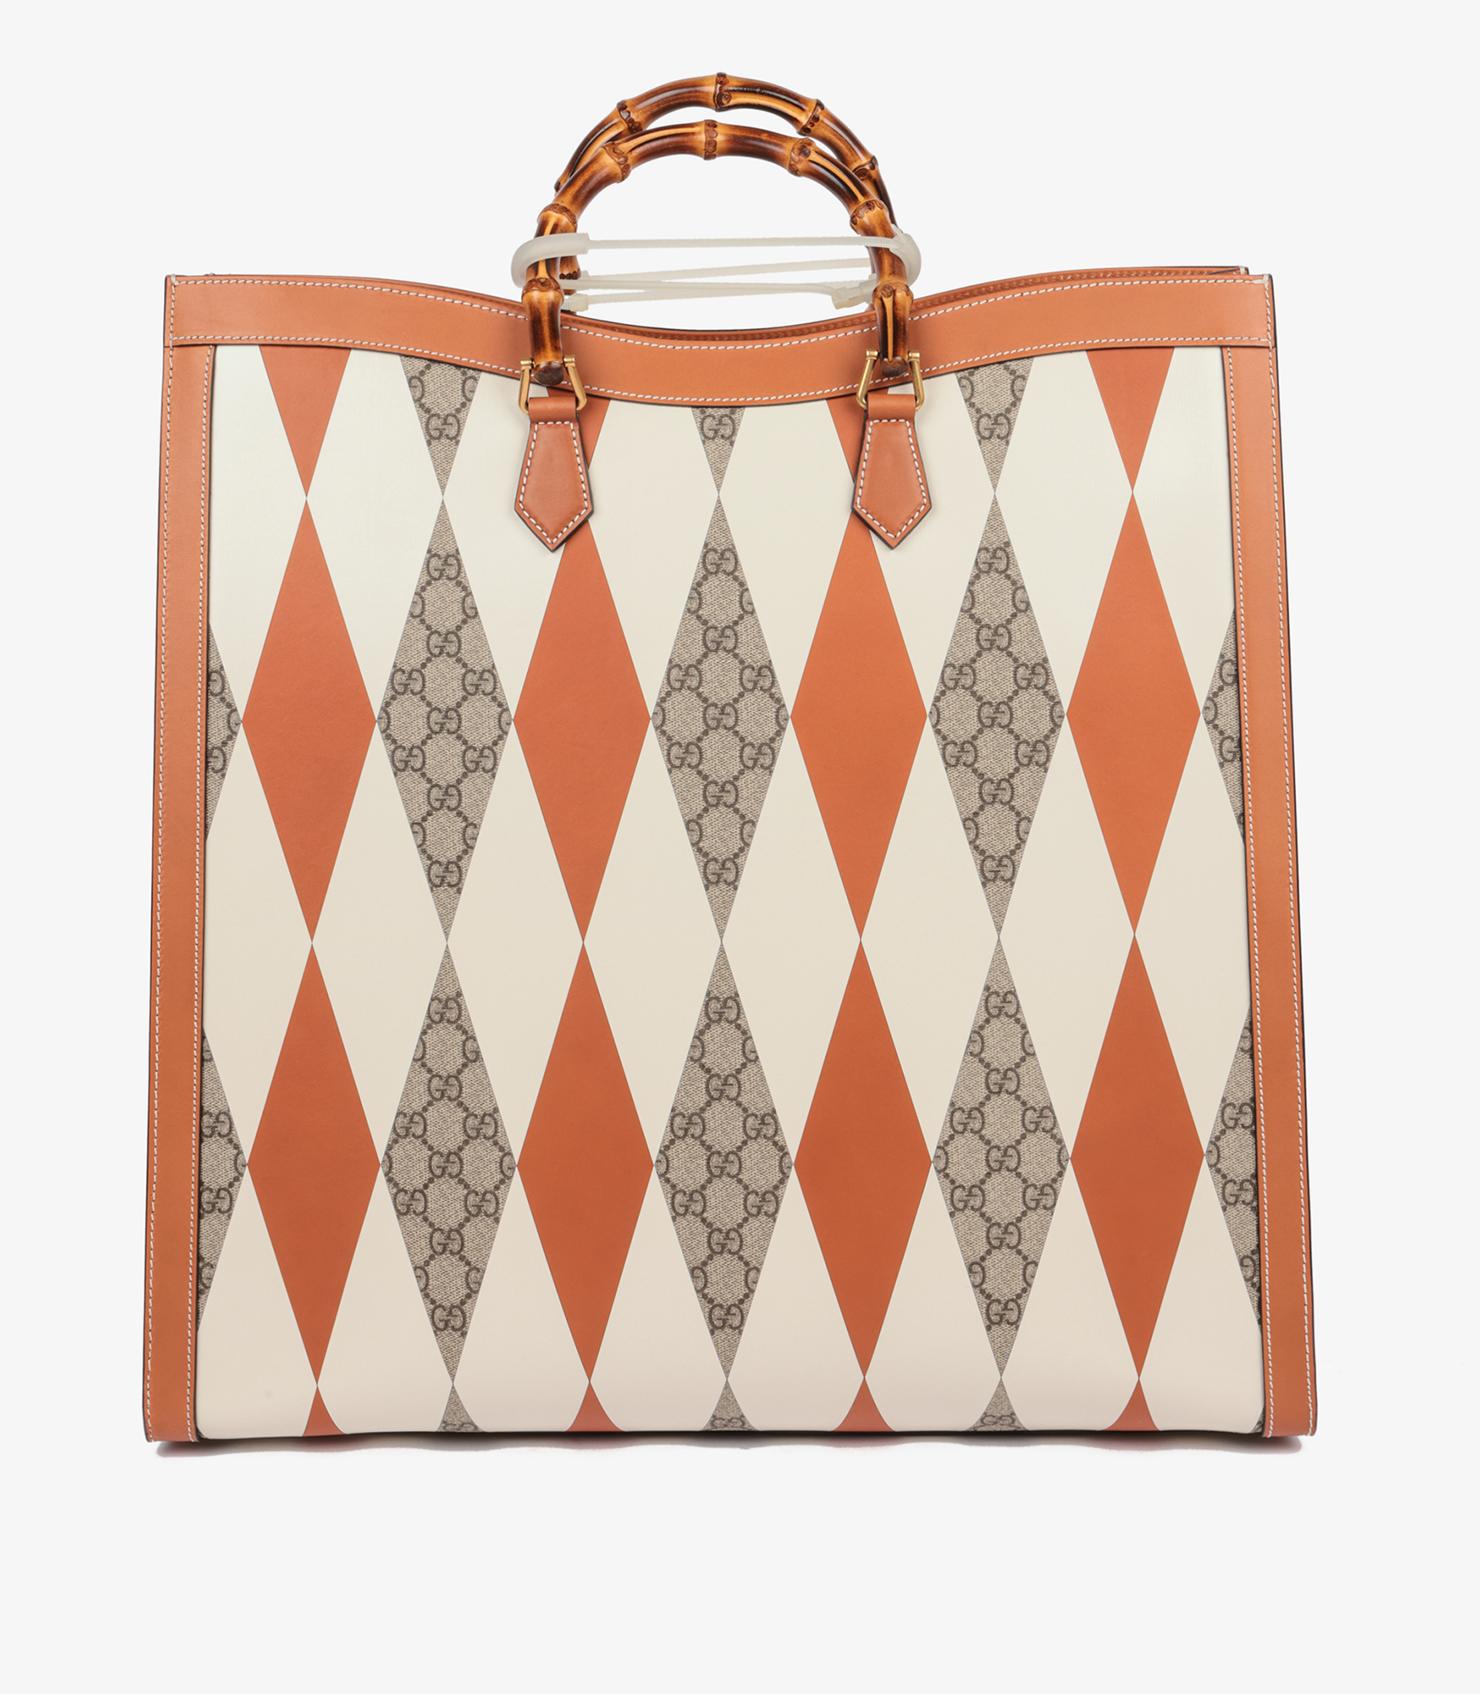 Women's or Men's Gucci Brown, White & GG Supreme Coated Canvas Patchwork Maxi Diana For Sale